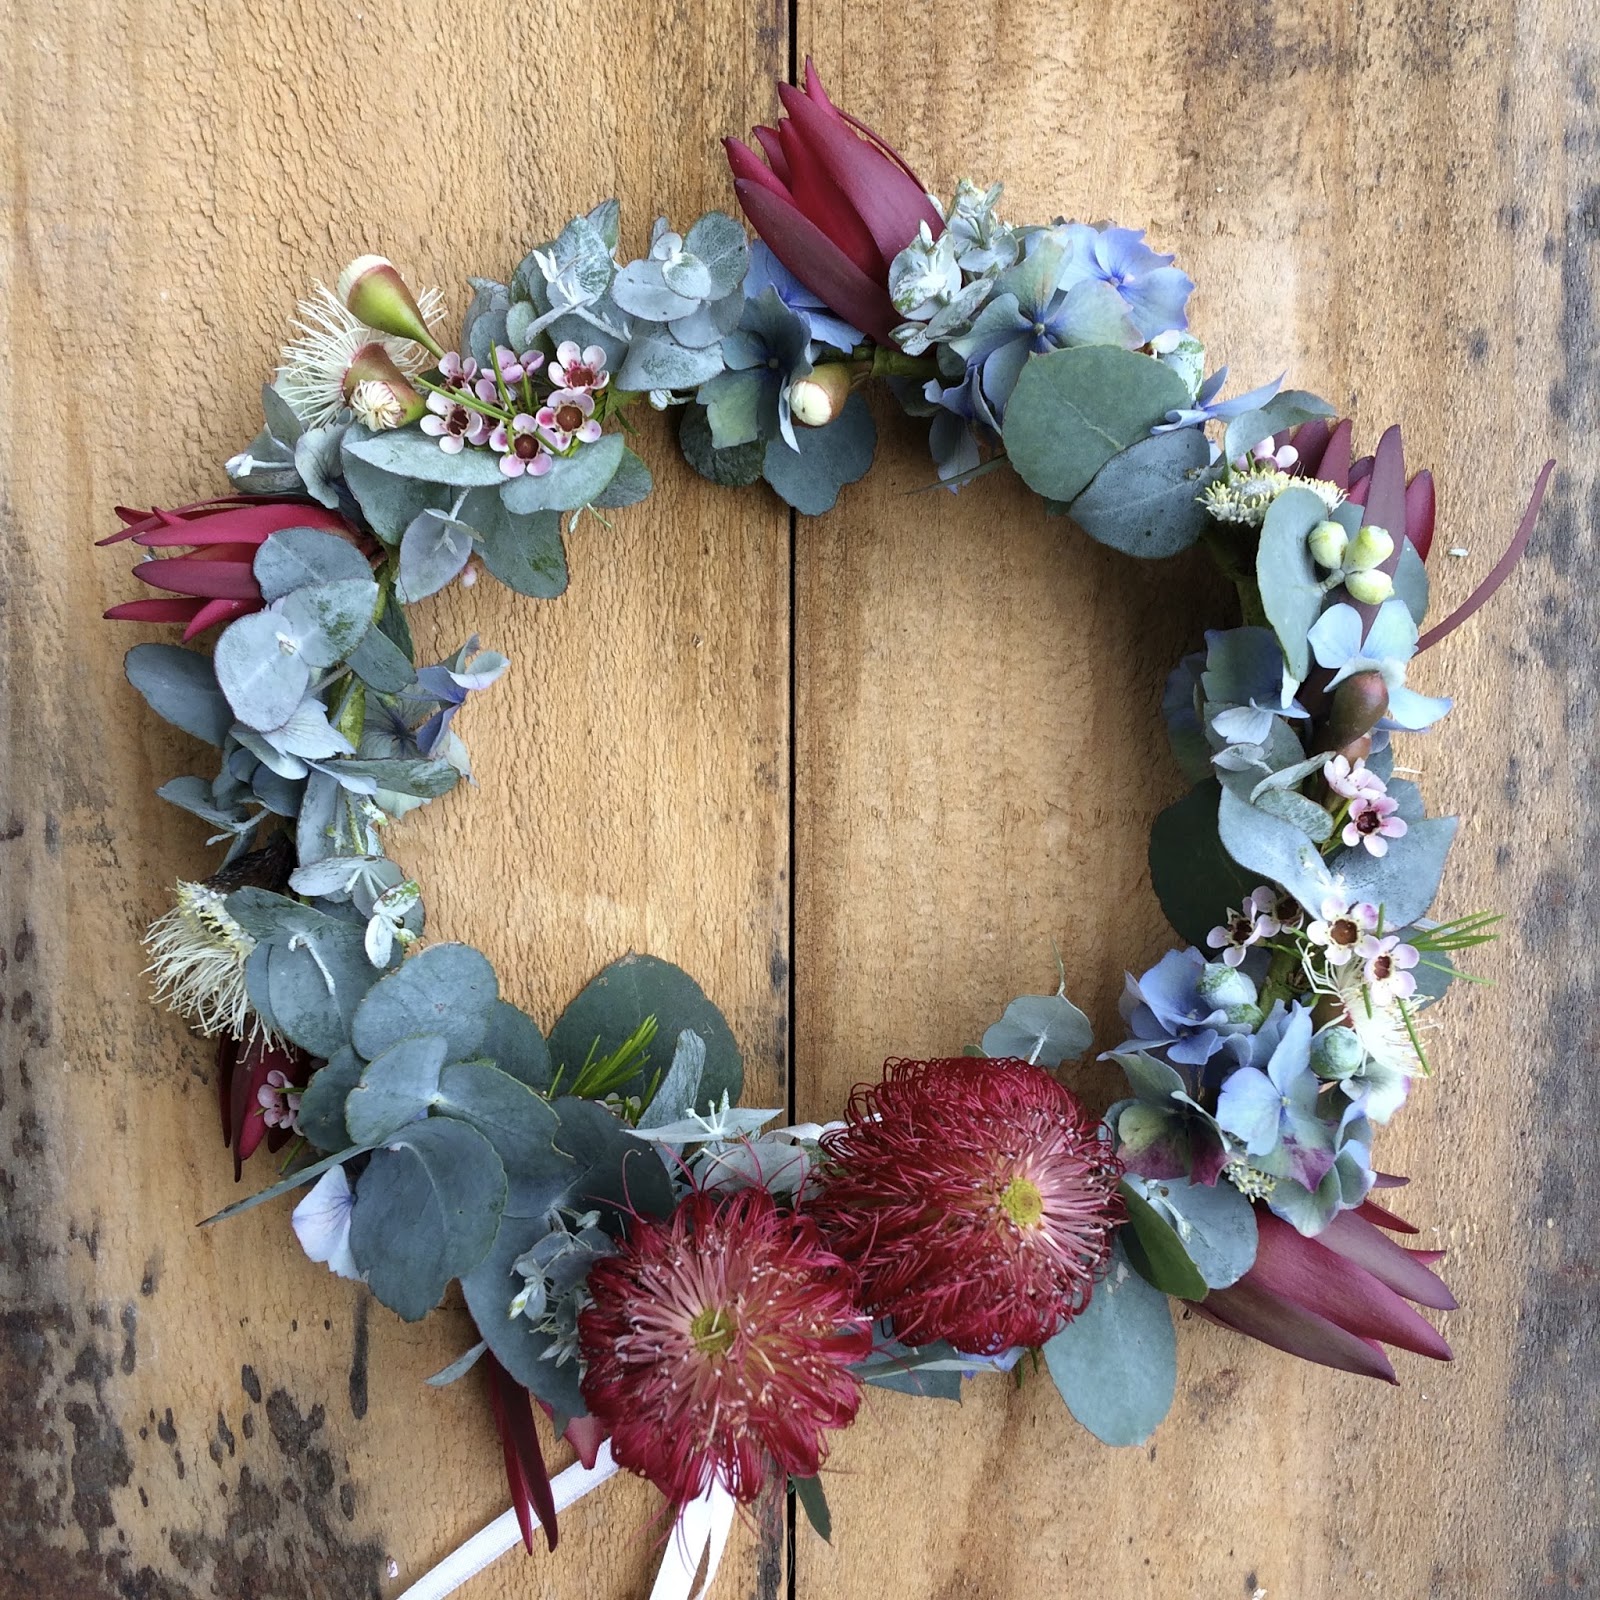 Swallows Nest Farm: Floral Crowns and Flowers for Hair